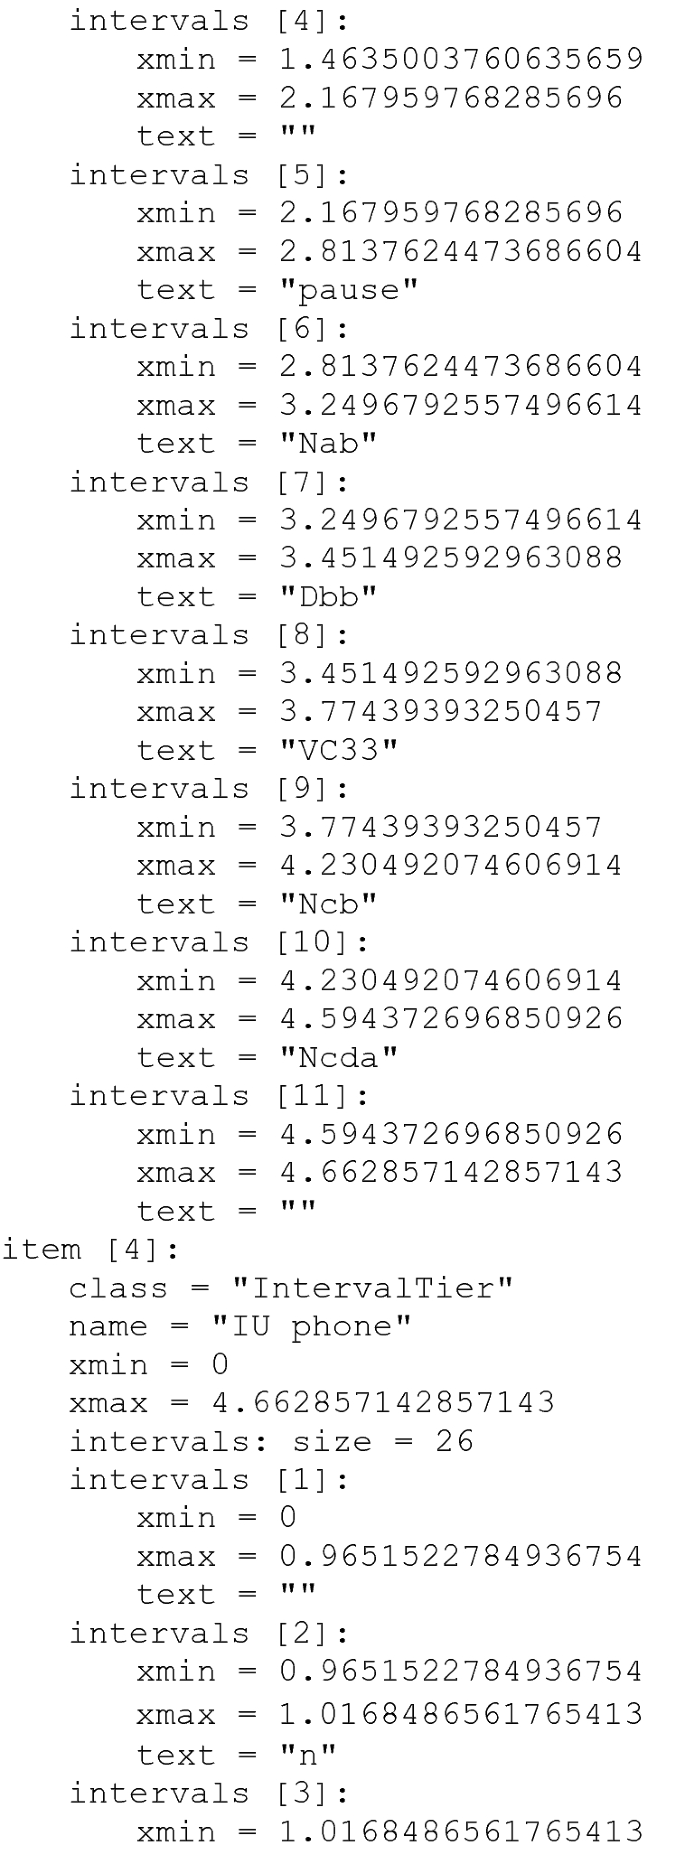 A set of program codes defines the intervals with x min, x max, and text as pause, n a b, d b b, v c 33, n c b, and n c d a.